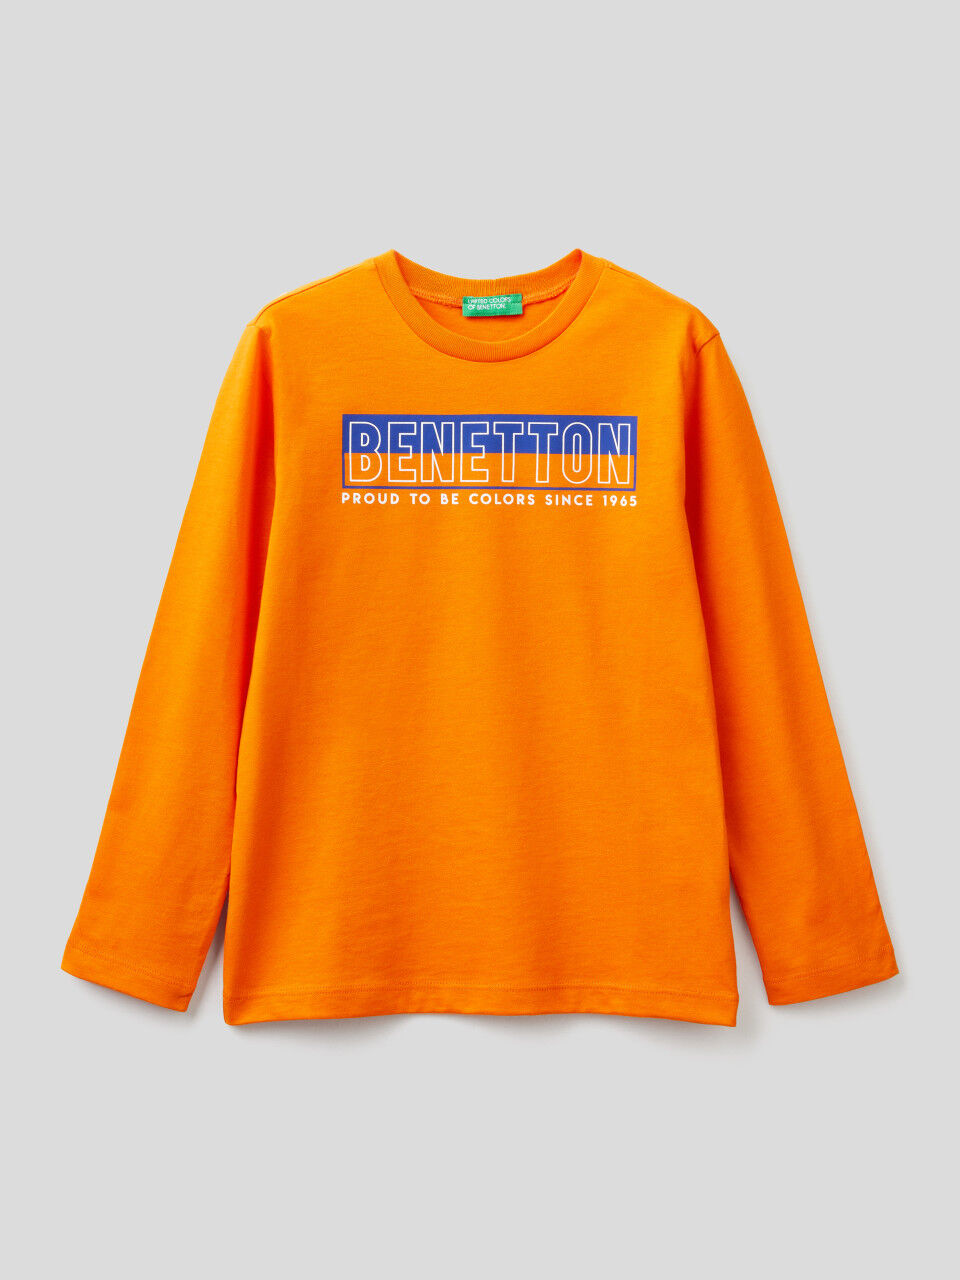 United Colors of Benetton Boys Long Sleeve Top